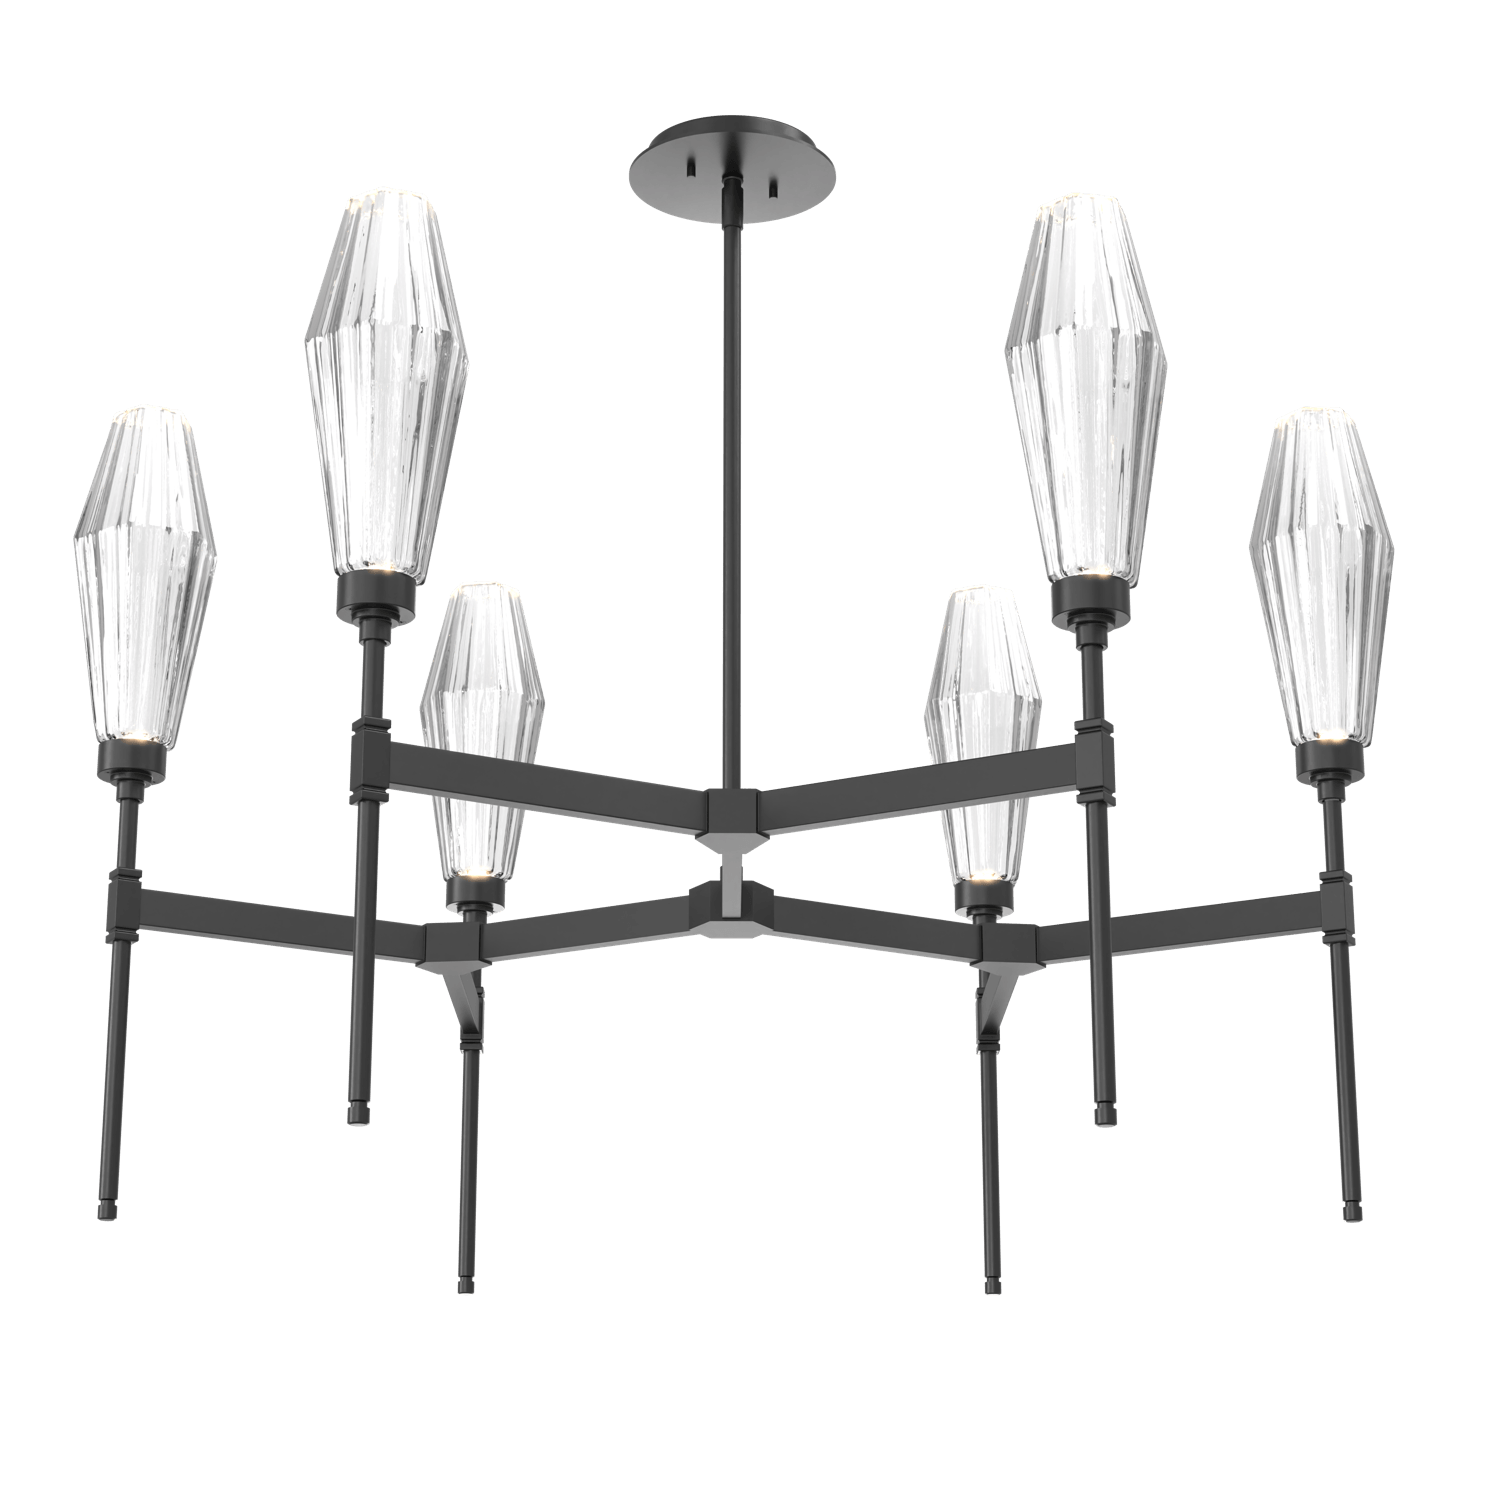 CHB0049-37-MB-RC-Hammerton-Studio-Aalto-37-inch-round-belvedere-chandelier-with-matte-black-finish-and-optic-ribbed-clear-glass-shades-and-LED-lamping